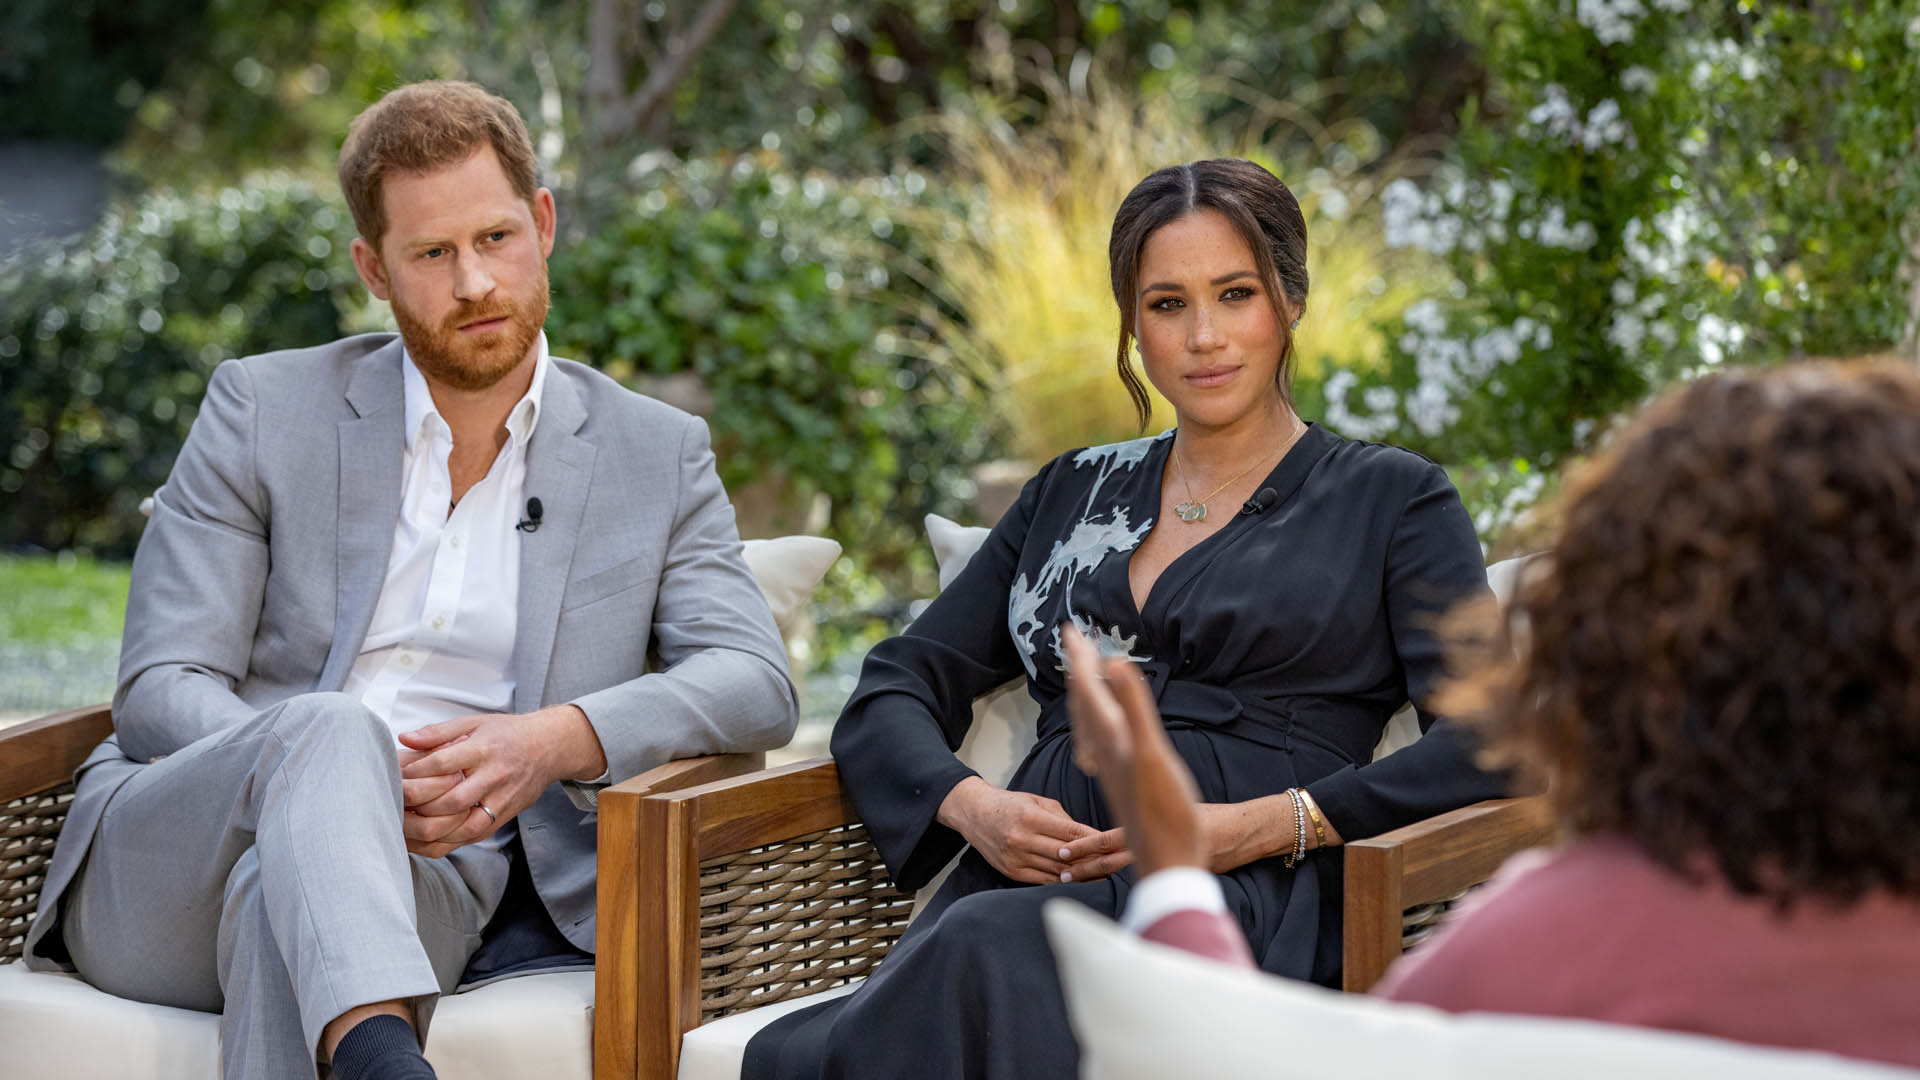 ‘Hilarious’ at Markle’s revelation…  17.1 million viewers in the U.S.